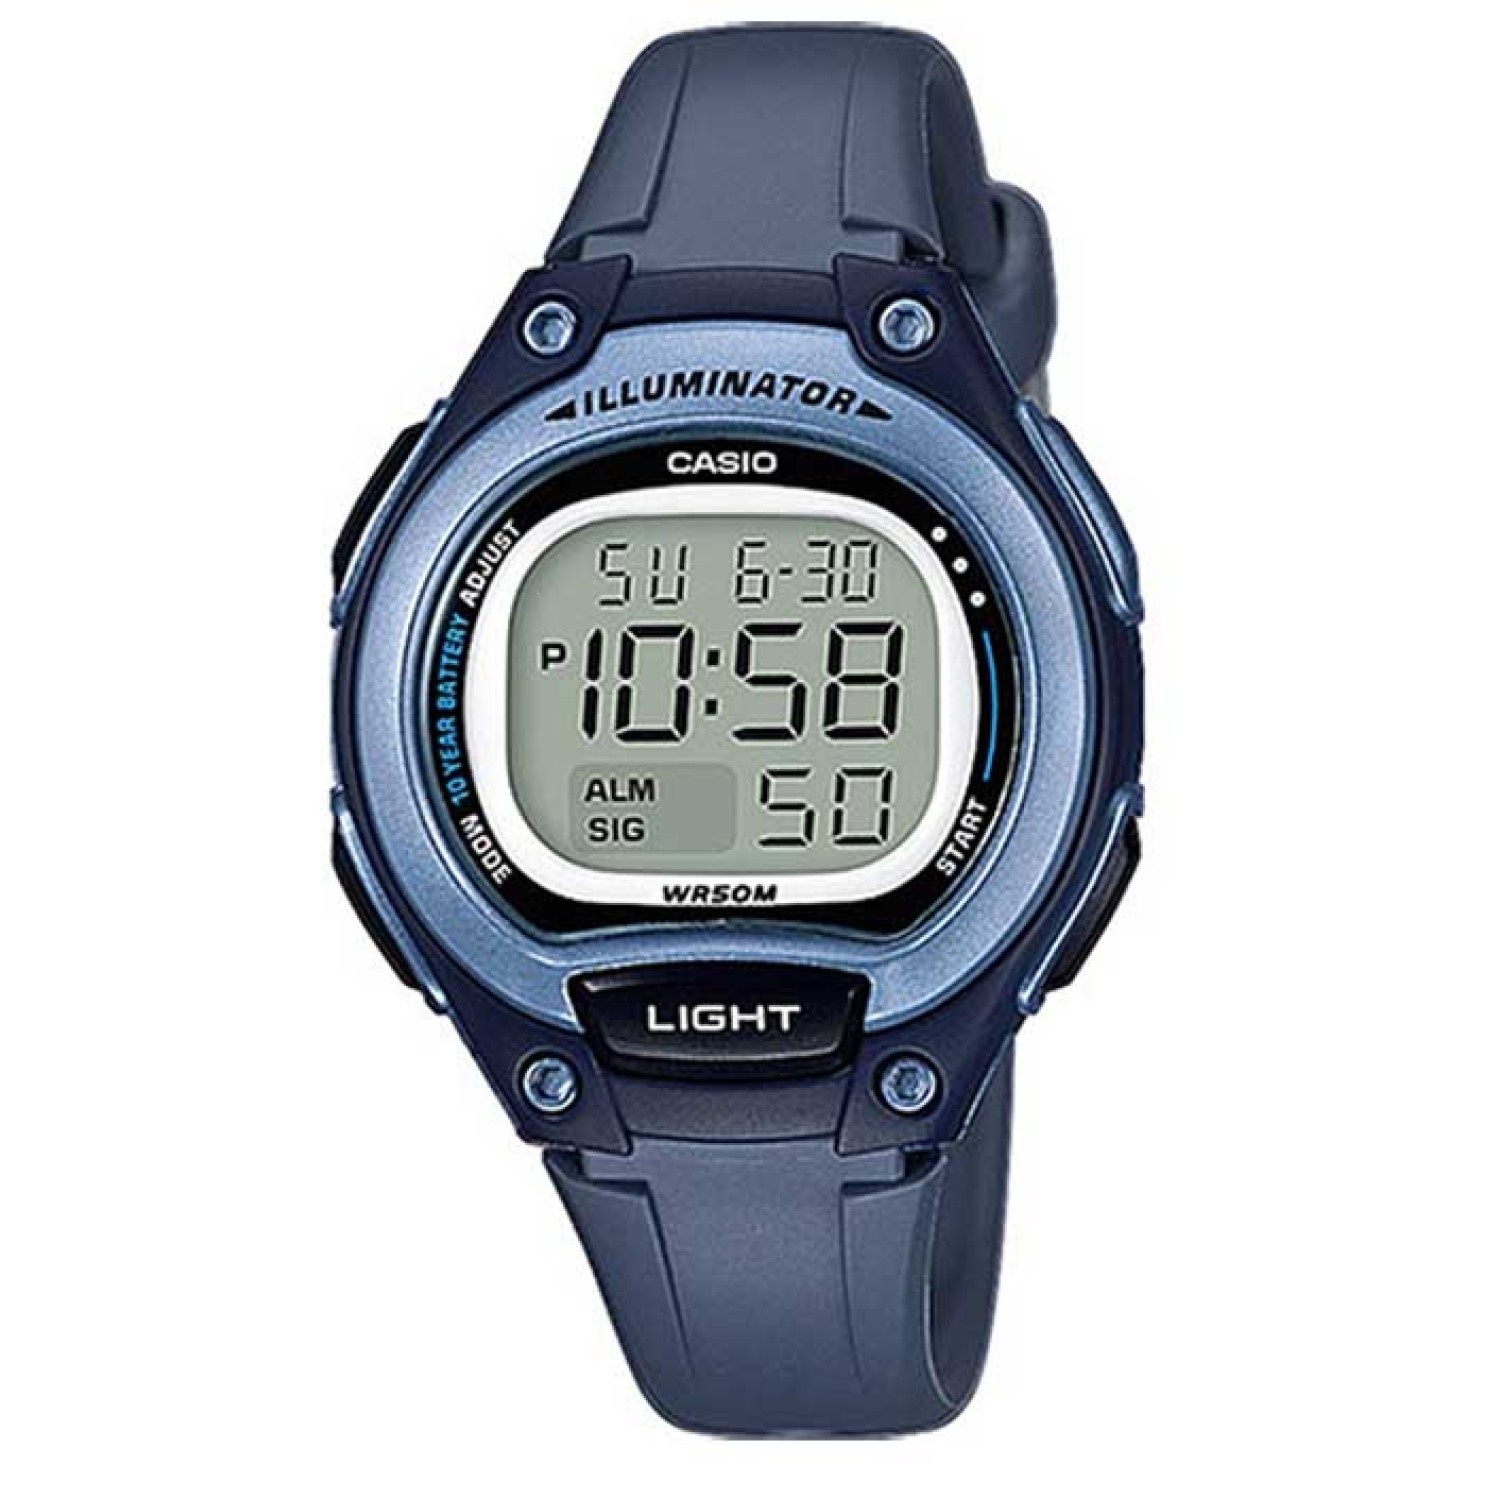 LW203-2A Casio 50 Metres 10 Year Battery Watch. Casio’s Illuminator digital watch is a sleek and sporty timepiece featuring a black plastic resin band, a metallic resin case and a large digital time display with stopwatch and day and date functions. Water